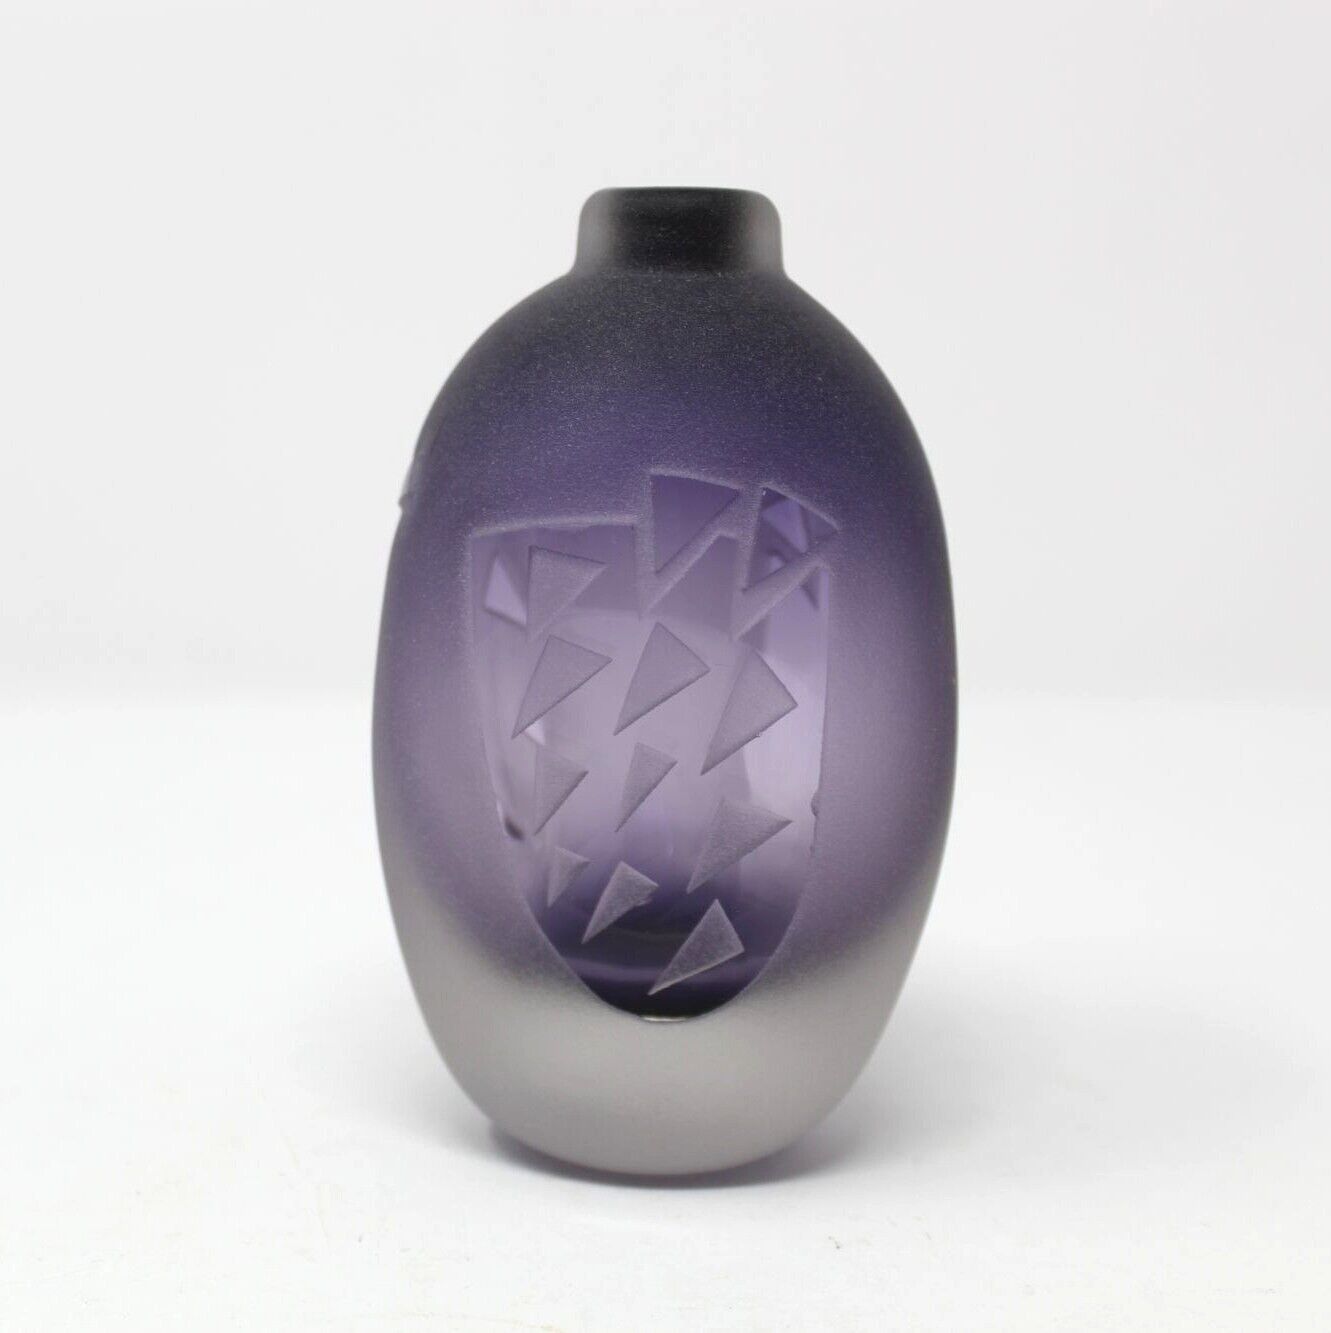 GEORGIA ART GLASS HANDCRAFTED AMETHYST FROSTED CUT GLASS VASE SIGNED LORETTA EBY